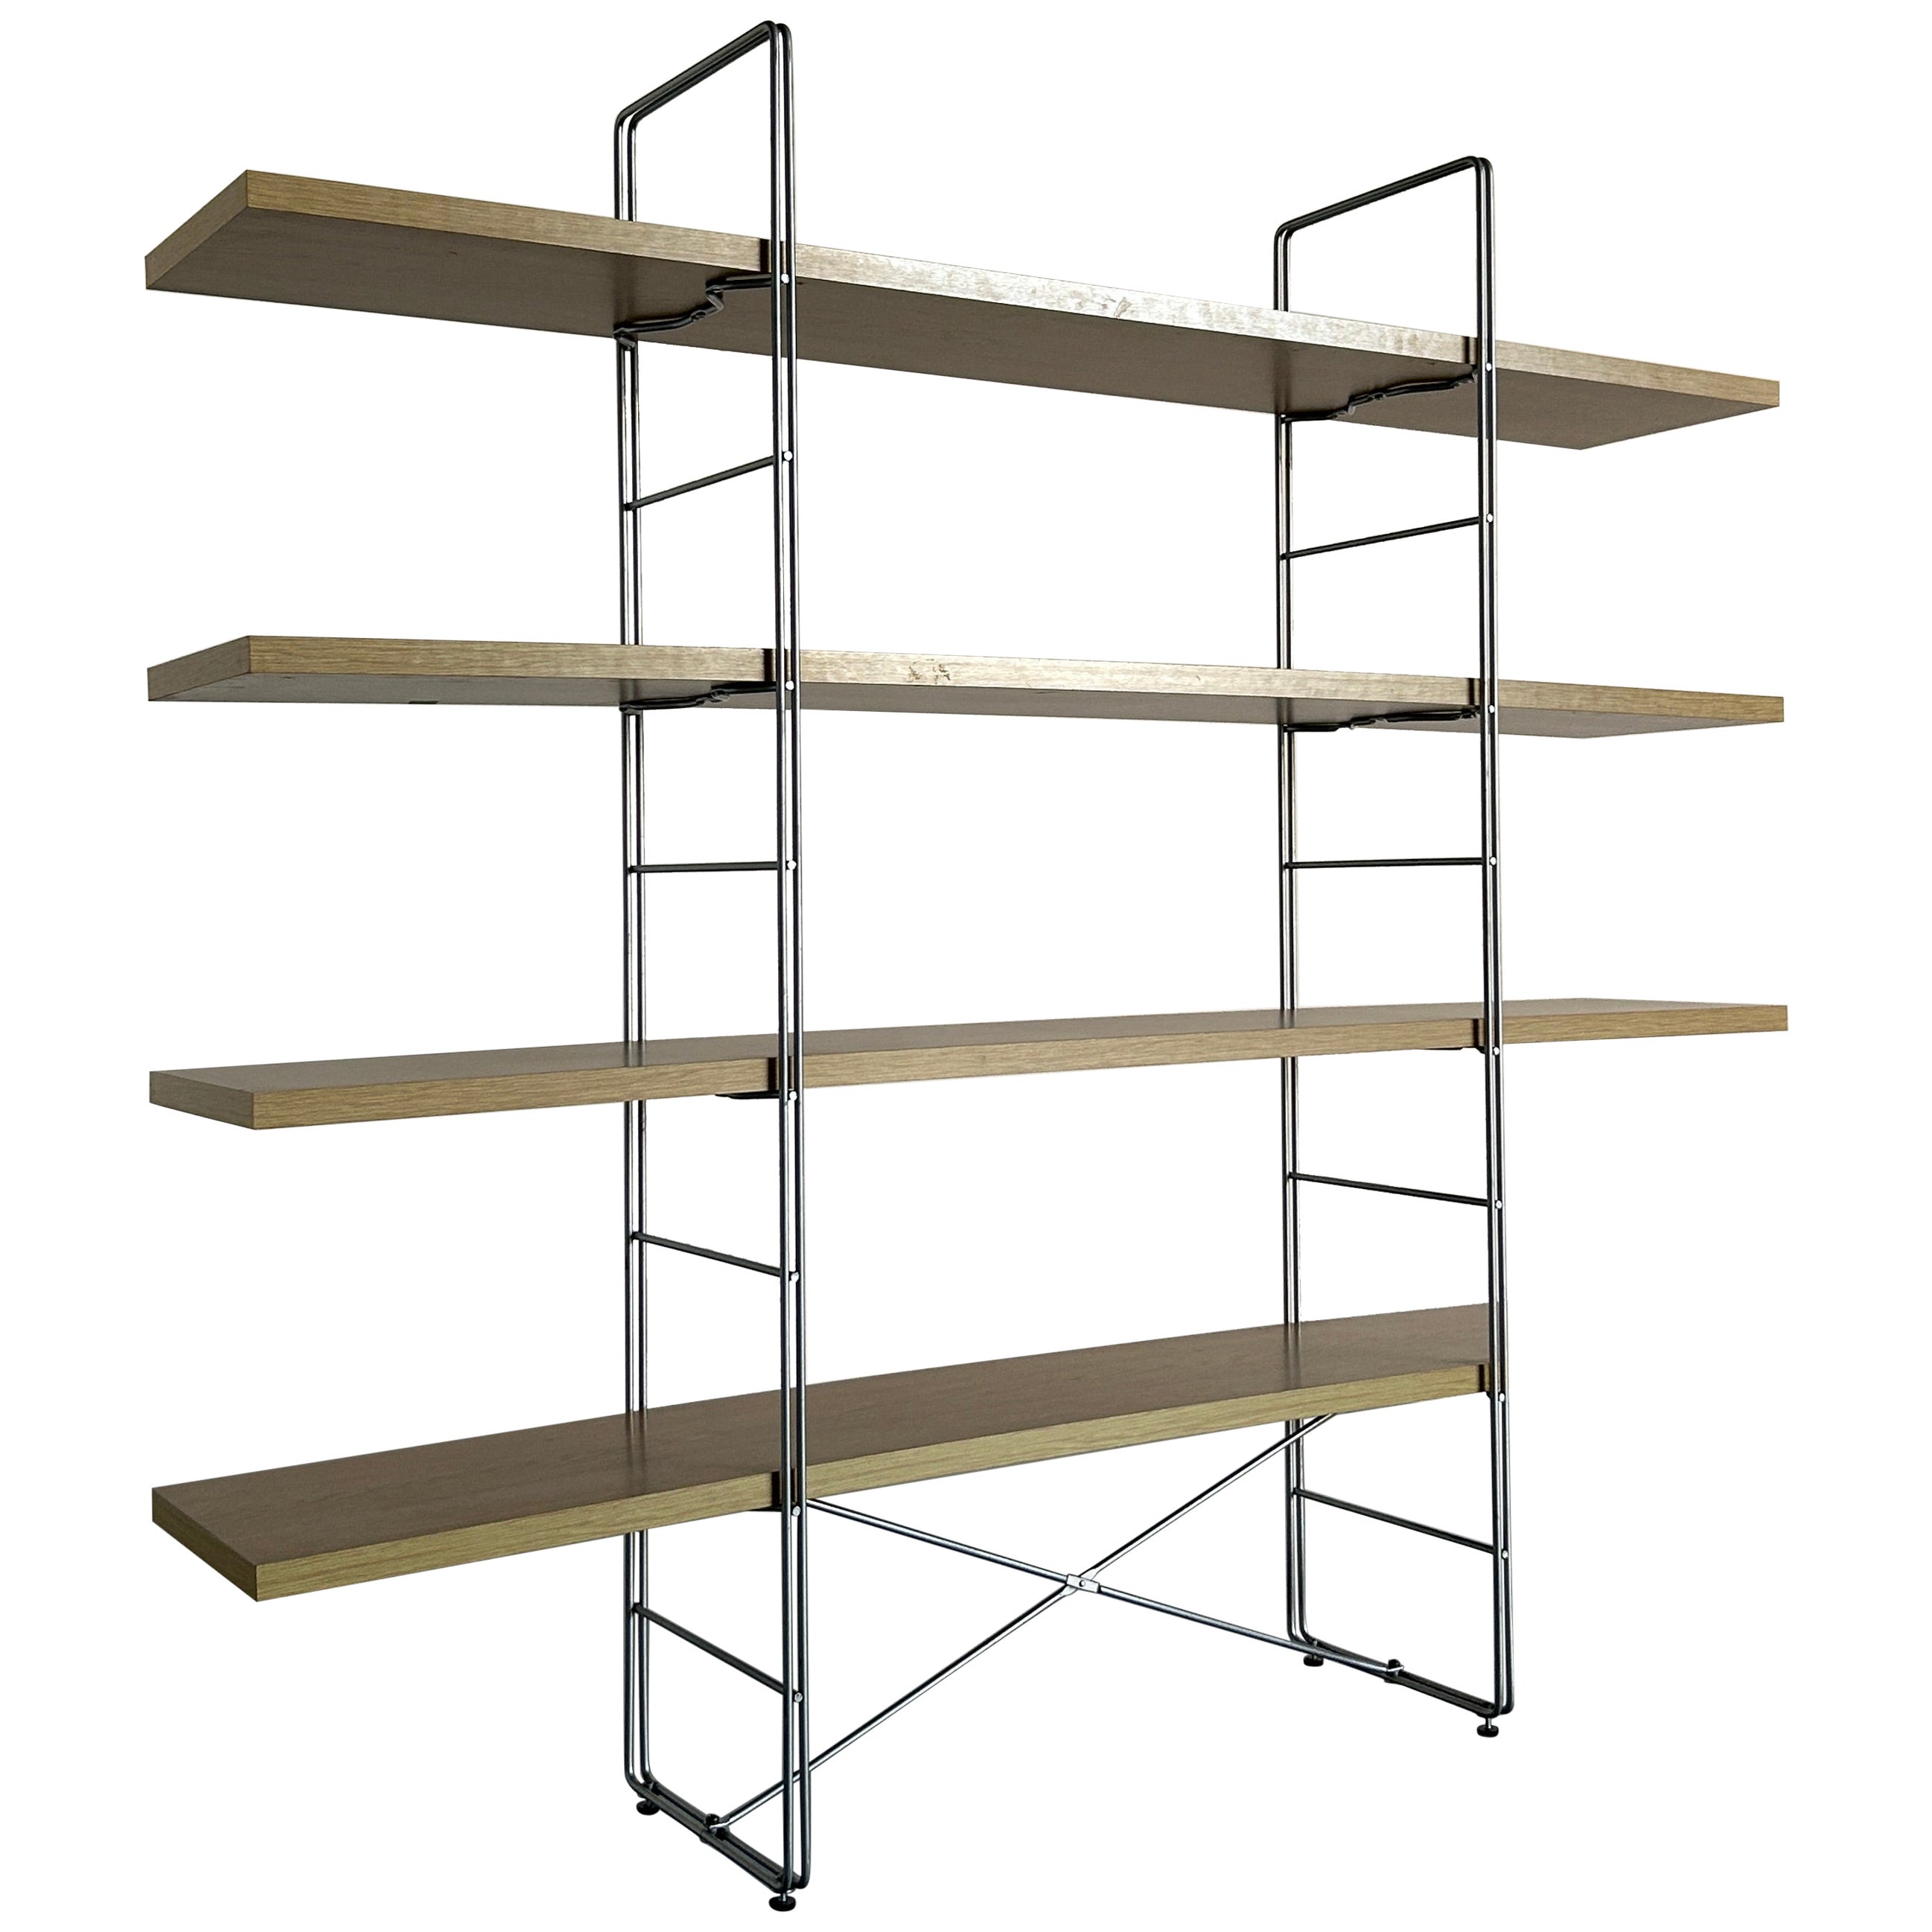 constante lila Gewoon Vintage Enetri Shelf by Niels Gammelgaard for Ikea, 1980s, String Shelving  Unit For Sale at 1stDibs